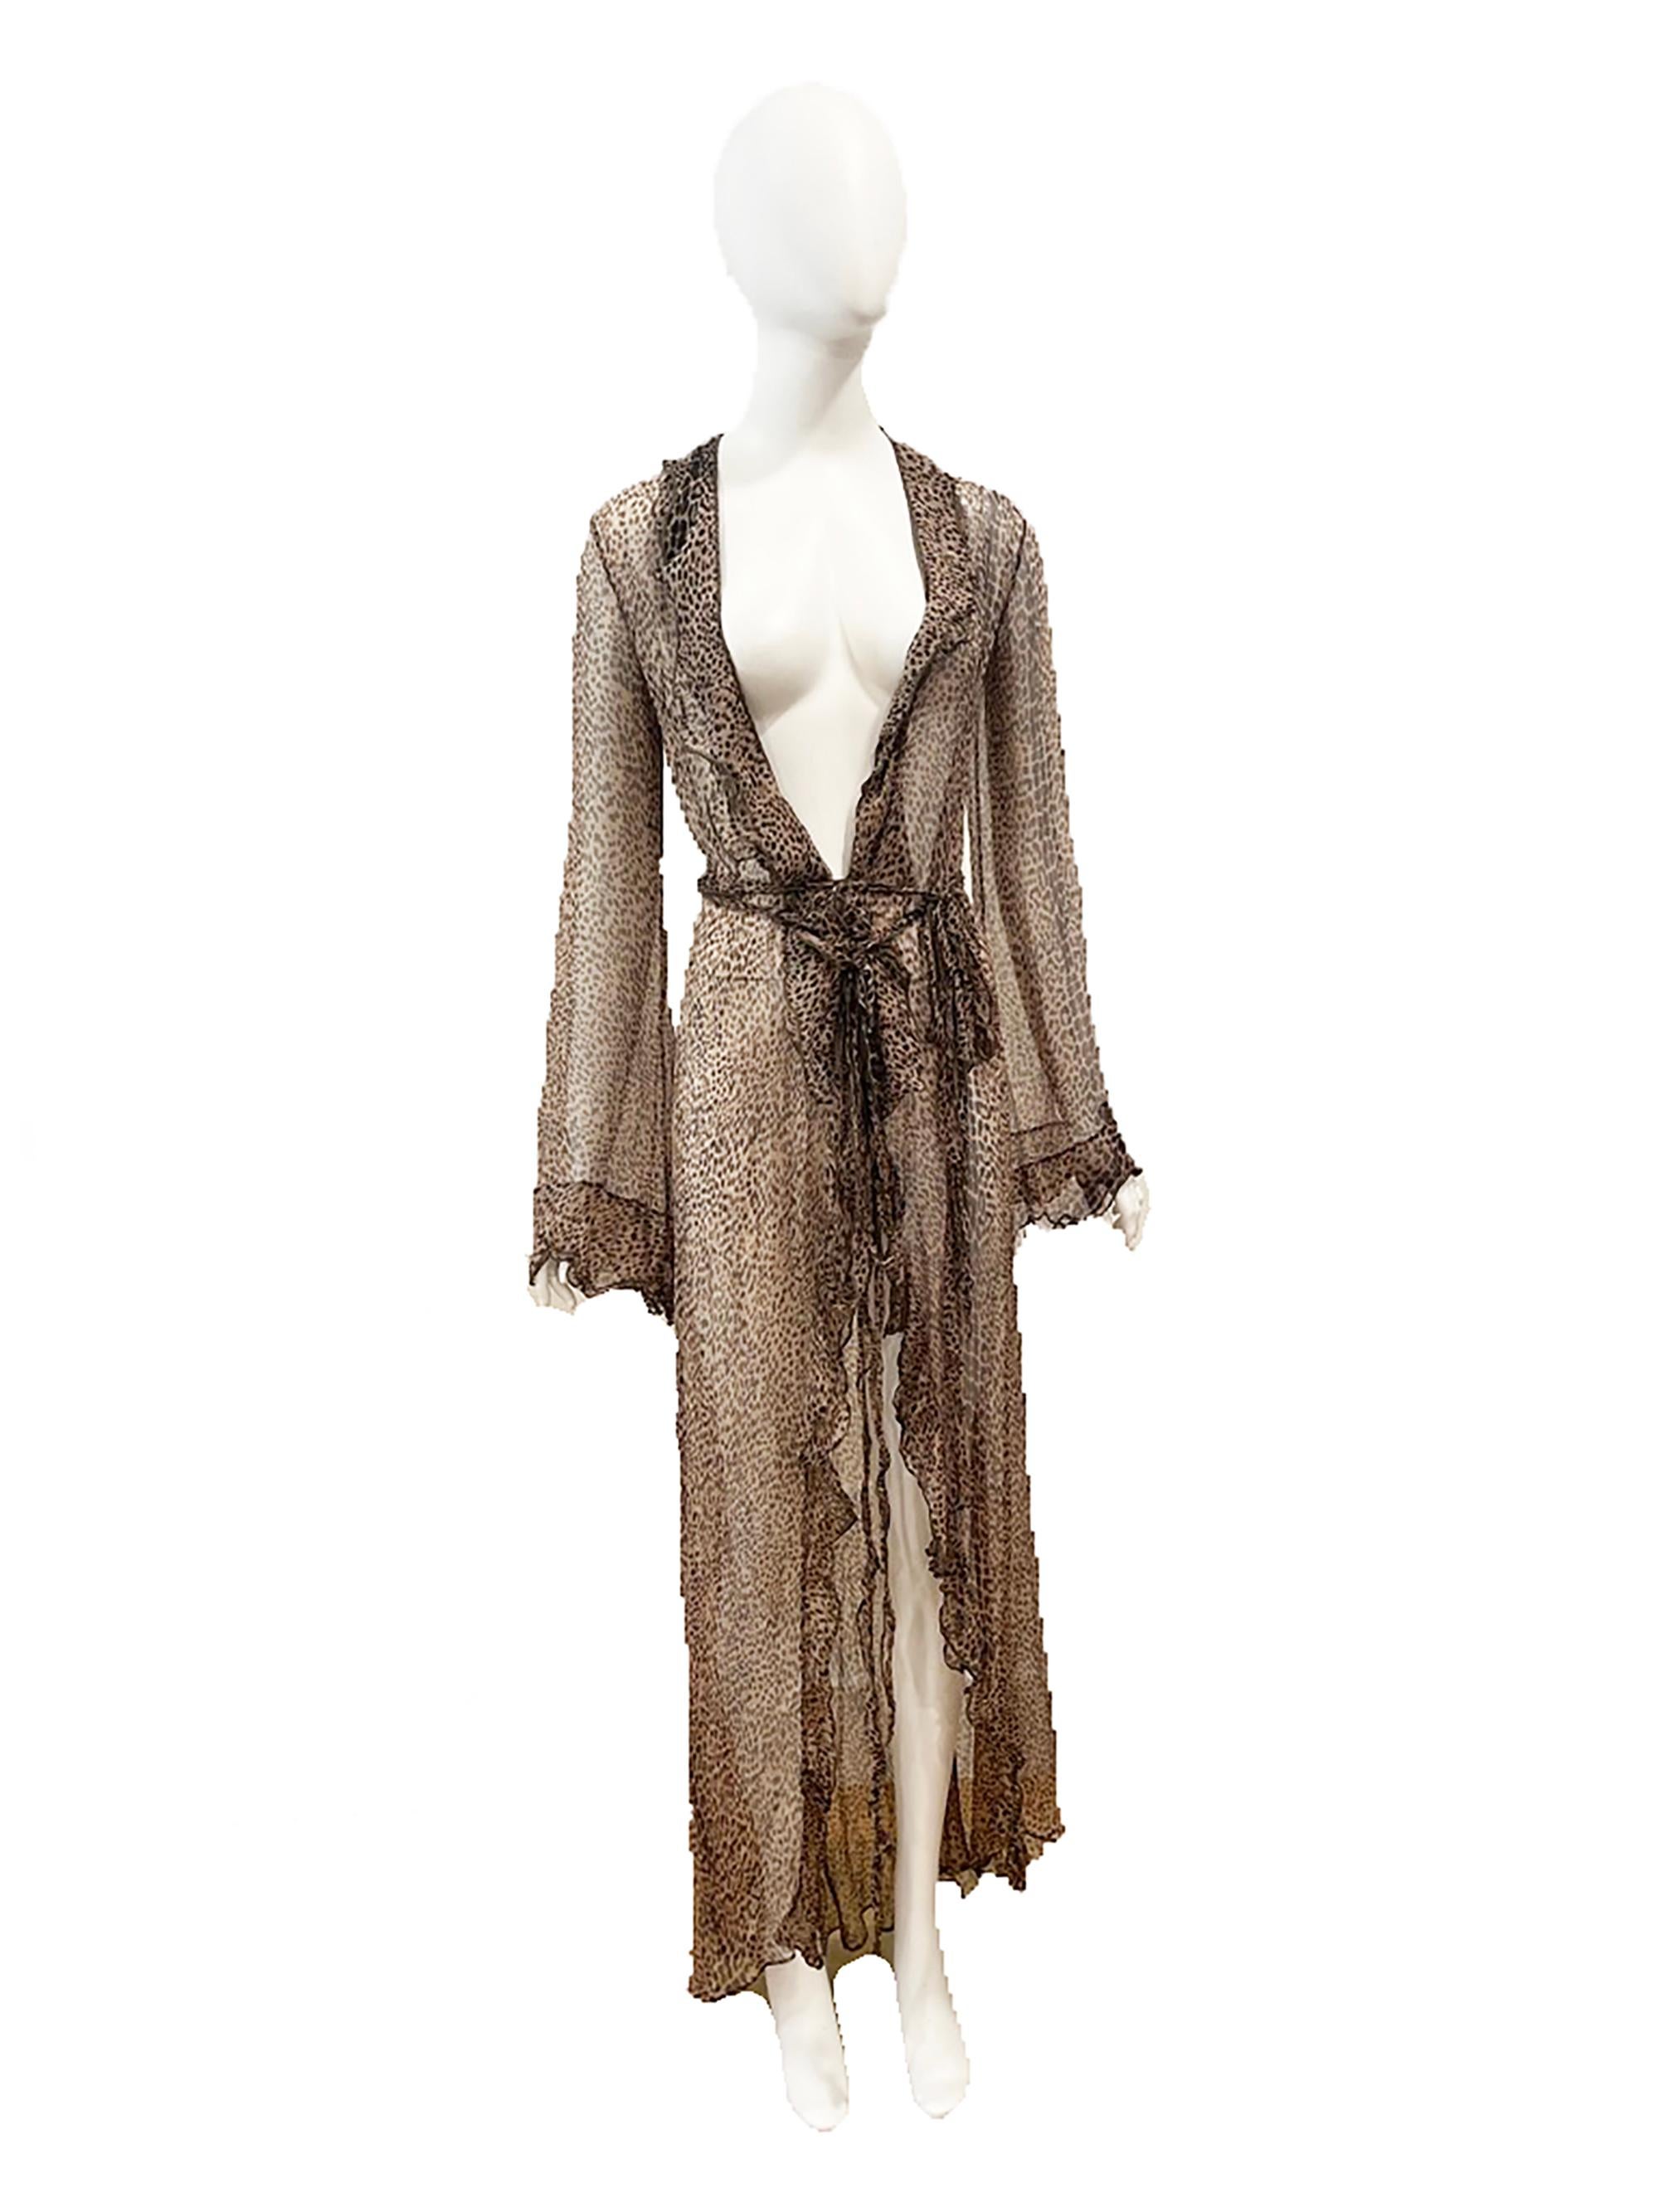 S/S 2002 Roberto Cavalli Runway Sheer Leopard Silk Wrap Dress
Condition: Excellent
Silk
Made in Italy
Bust: 32